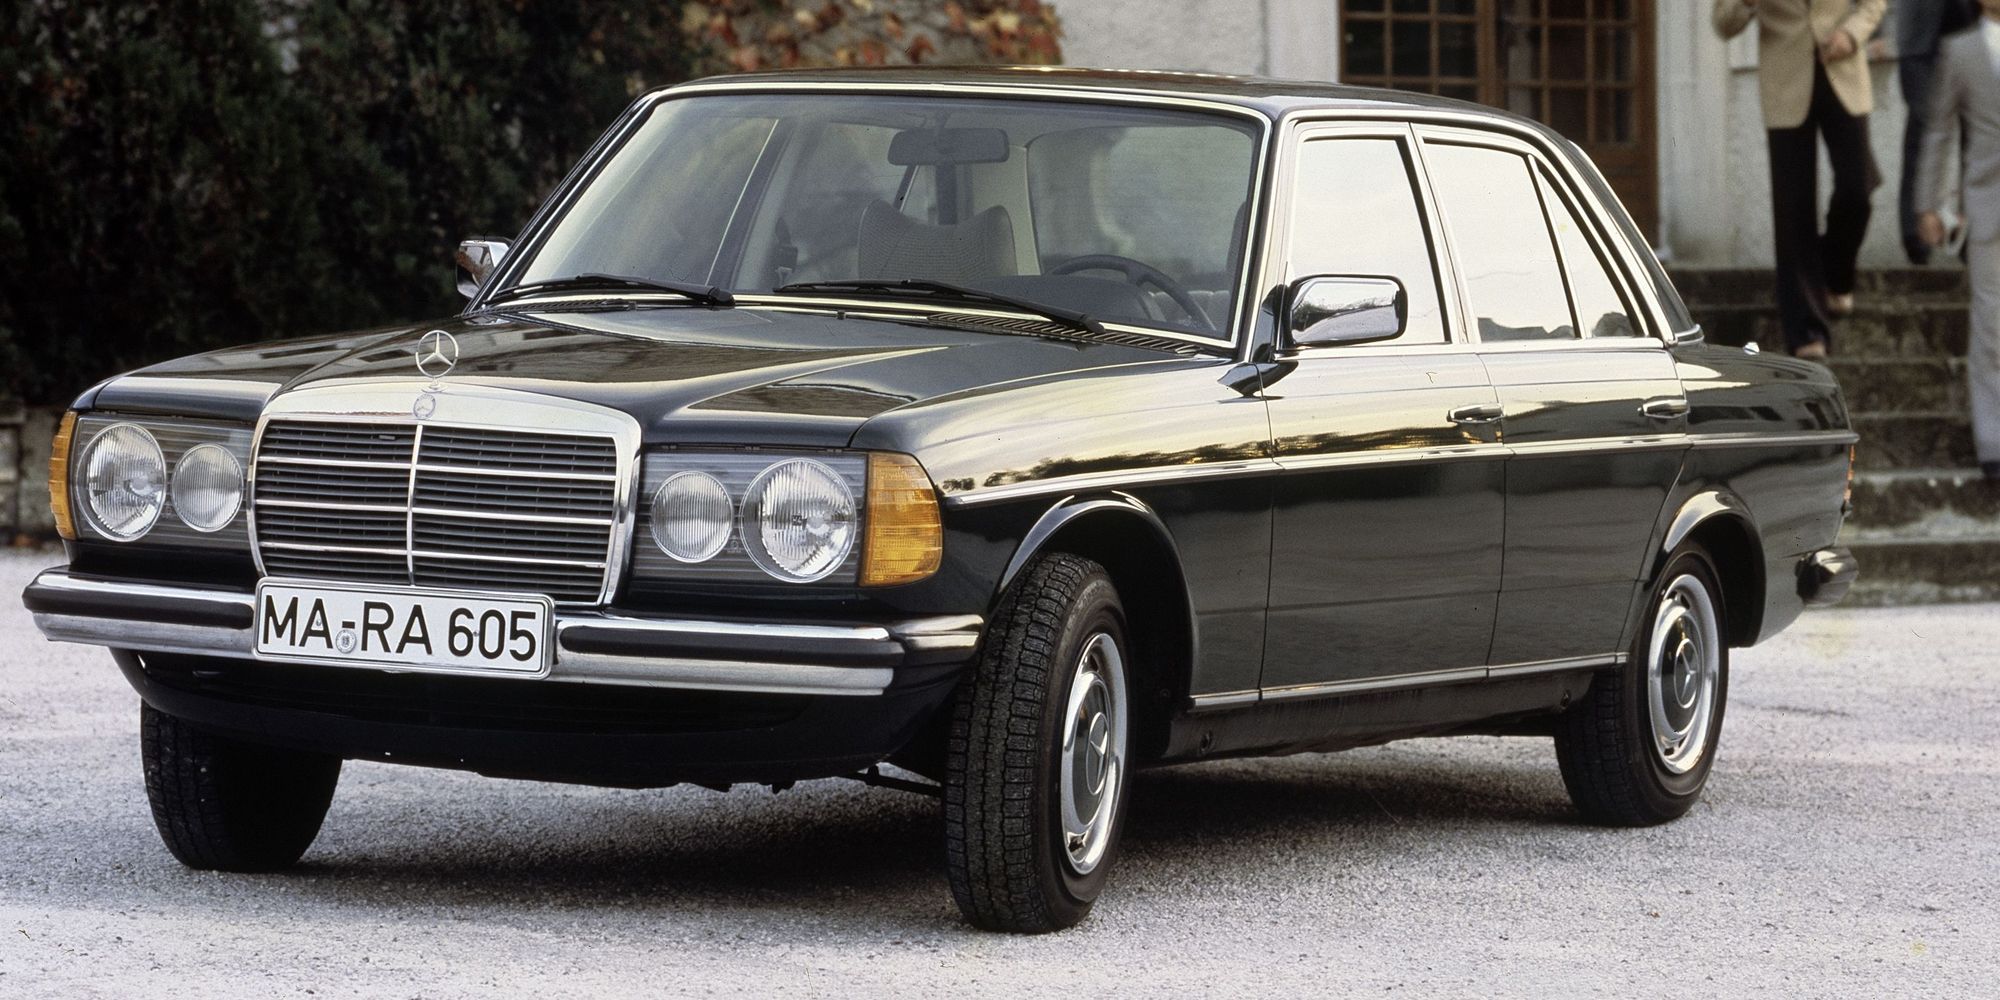 The W123 in black